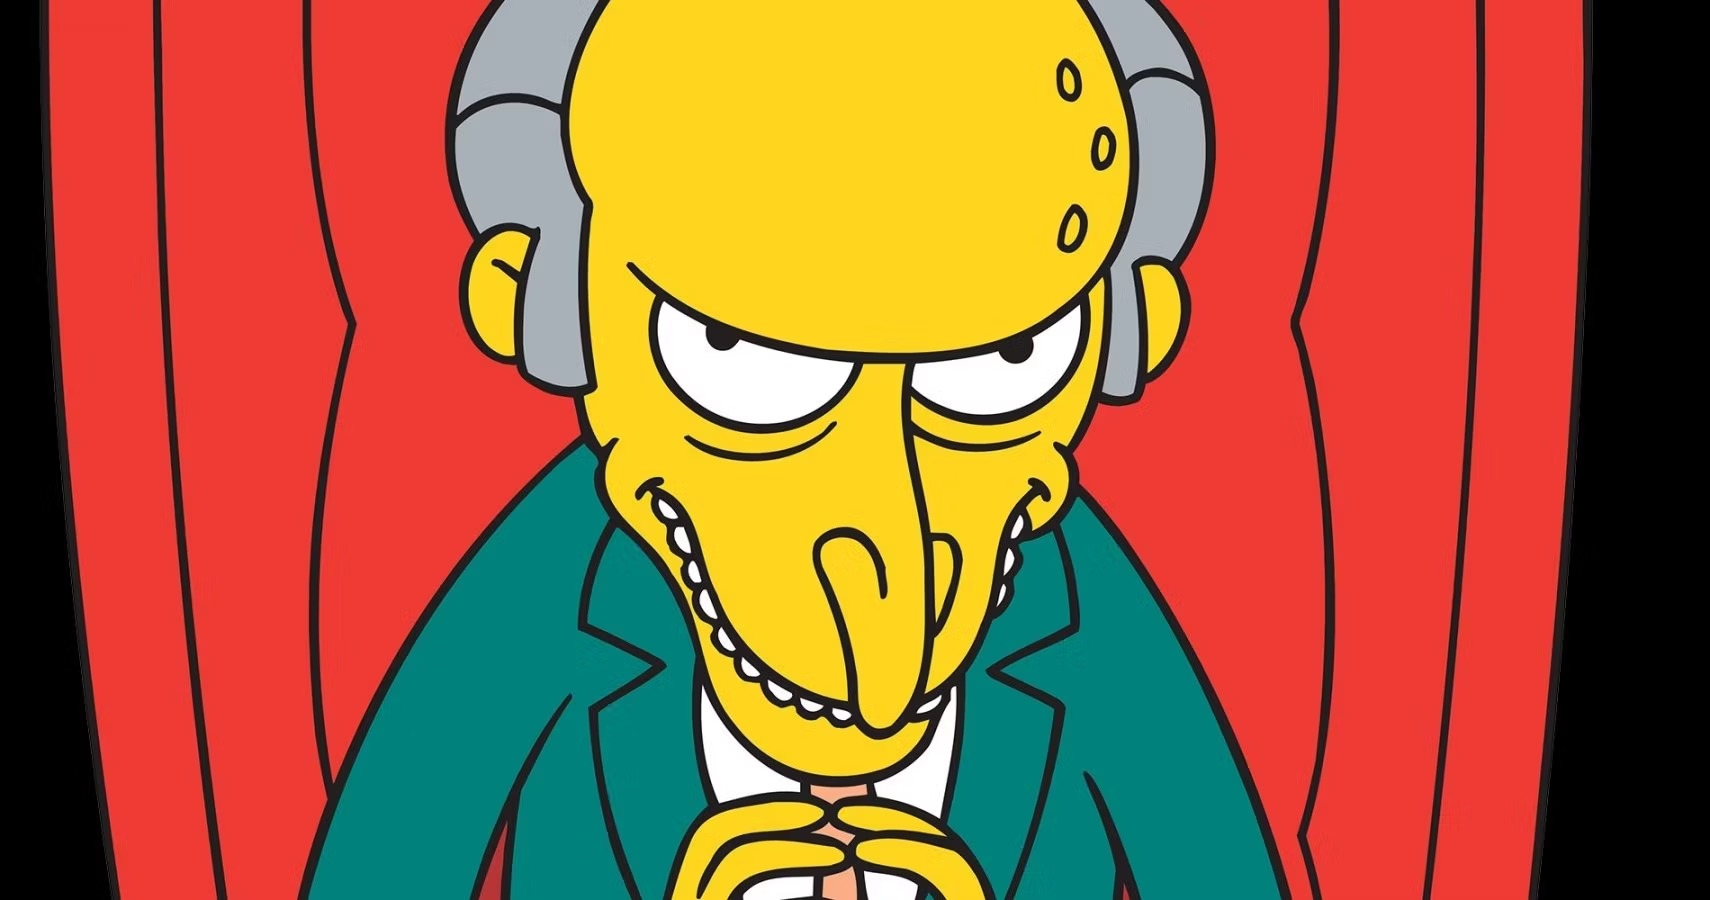 23 Facts About Mr. Burns (The Simpsons) - Facts.net